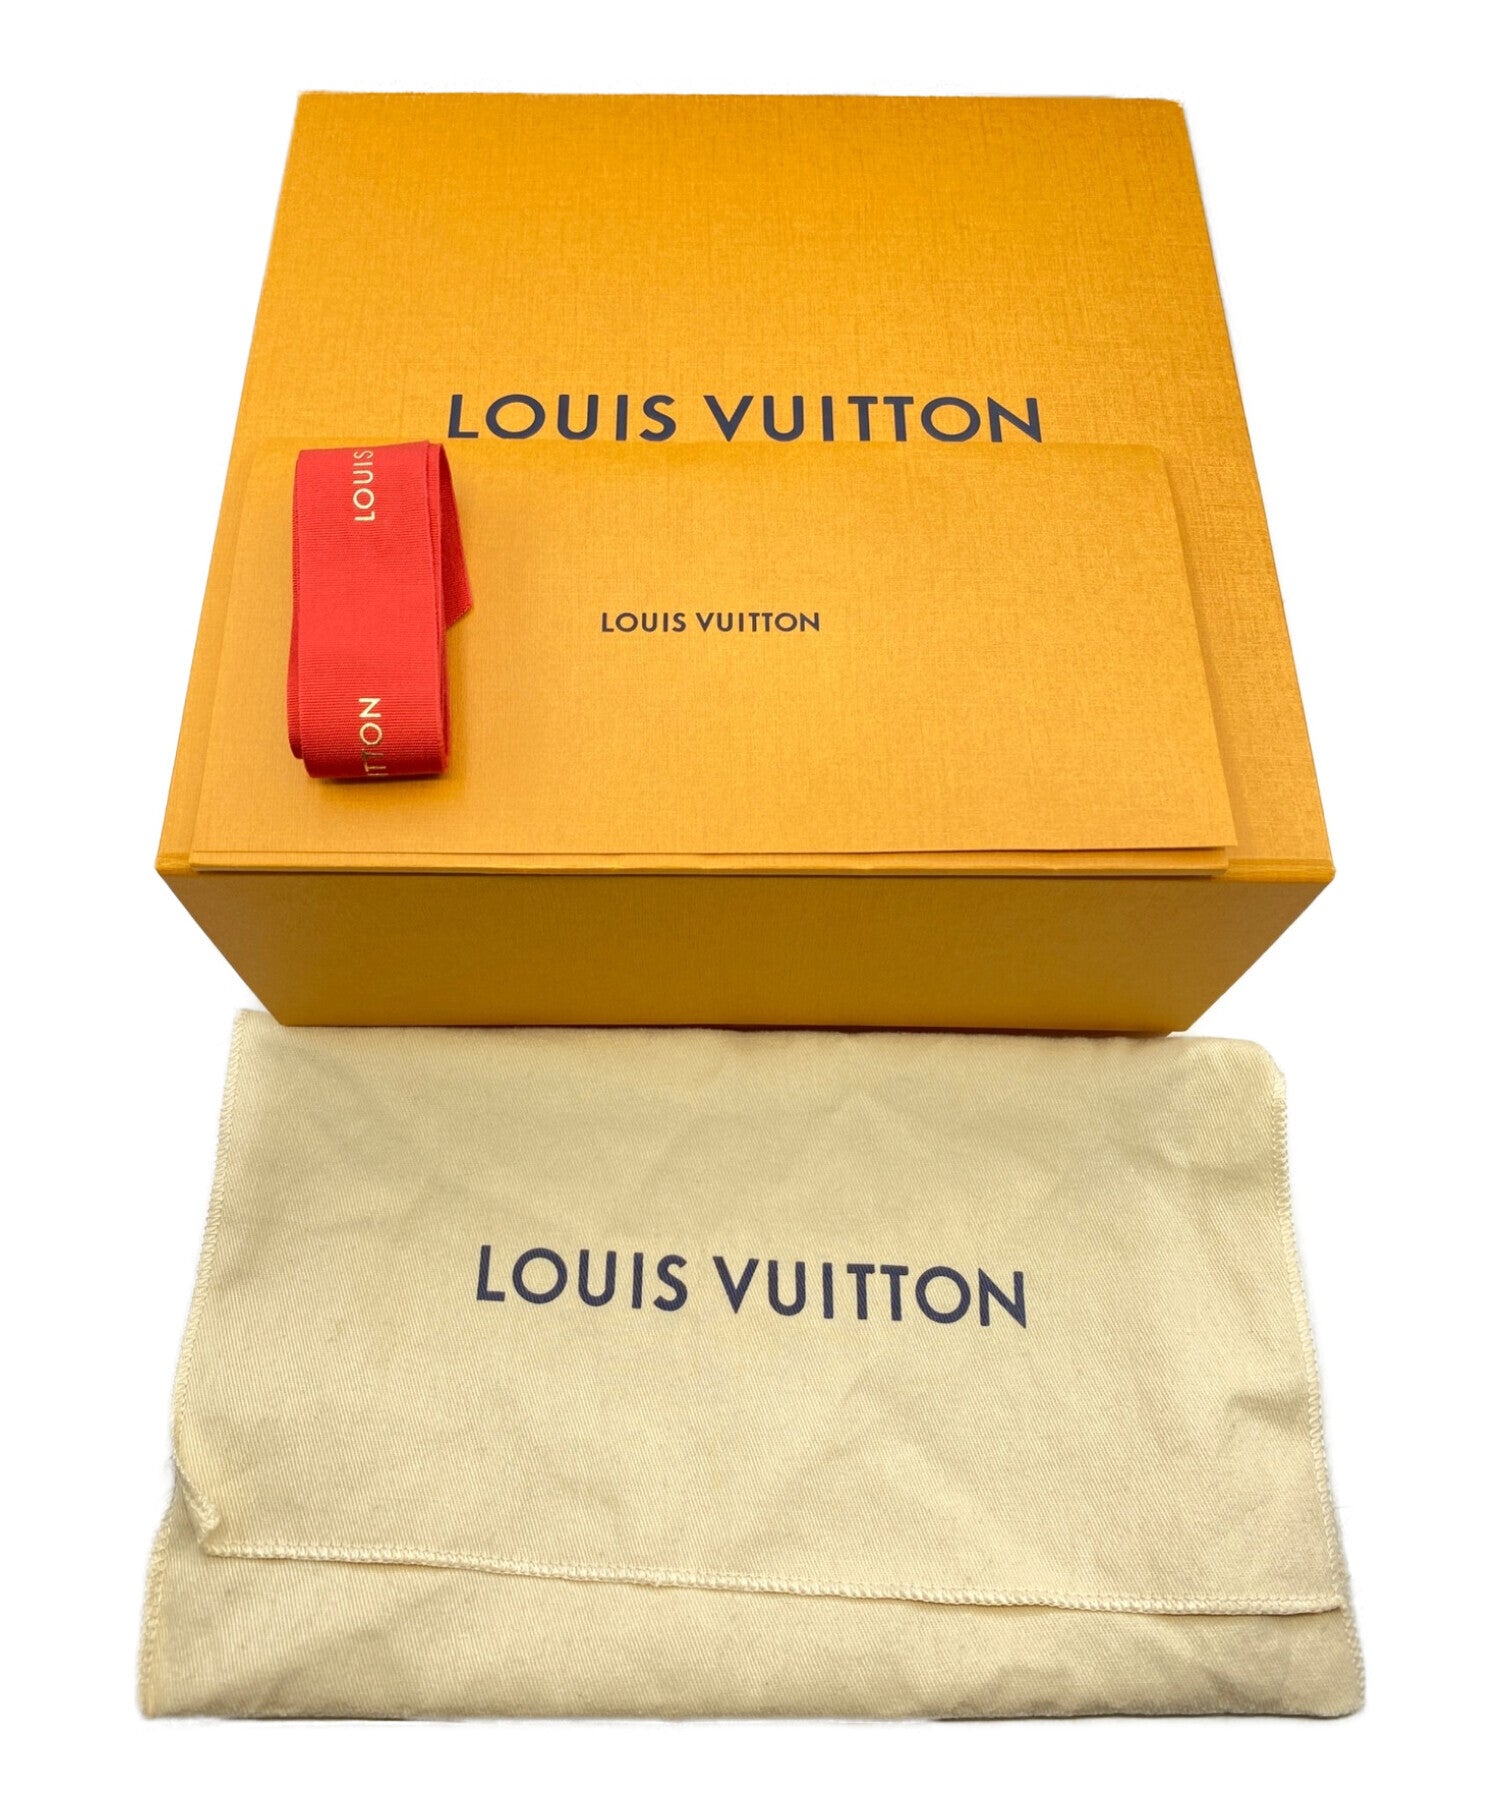 Classic Famous Louis Vuitton Orange Product Box Packaging with a